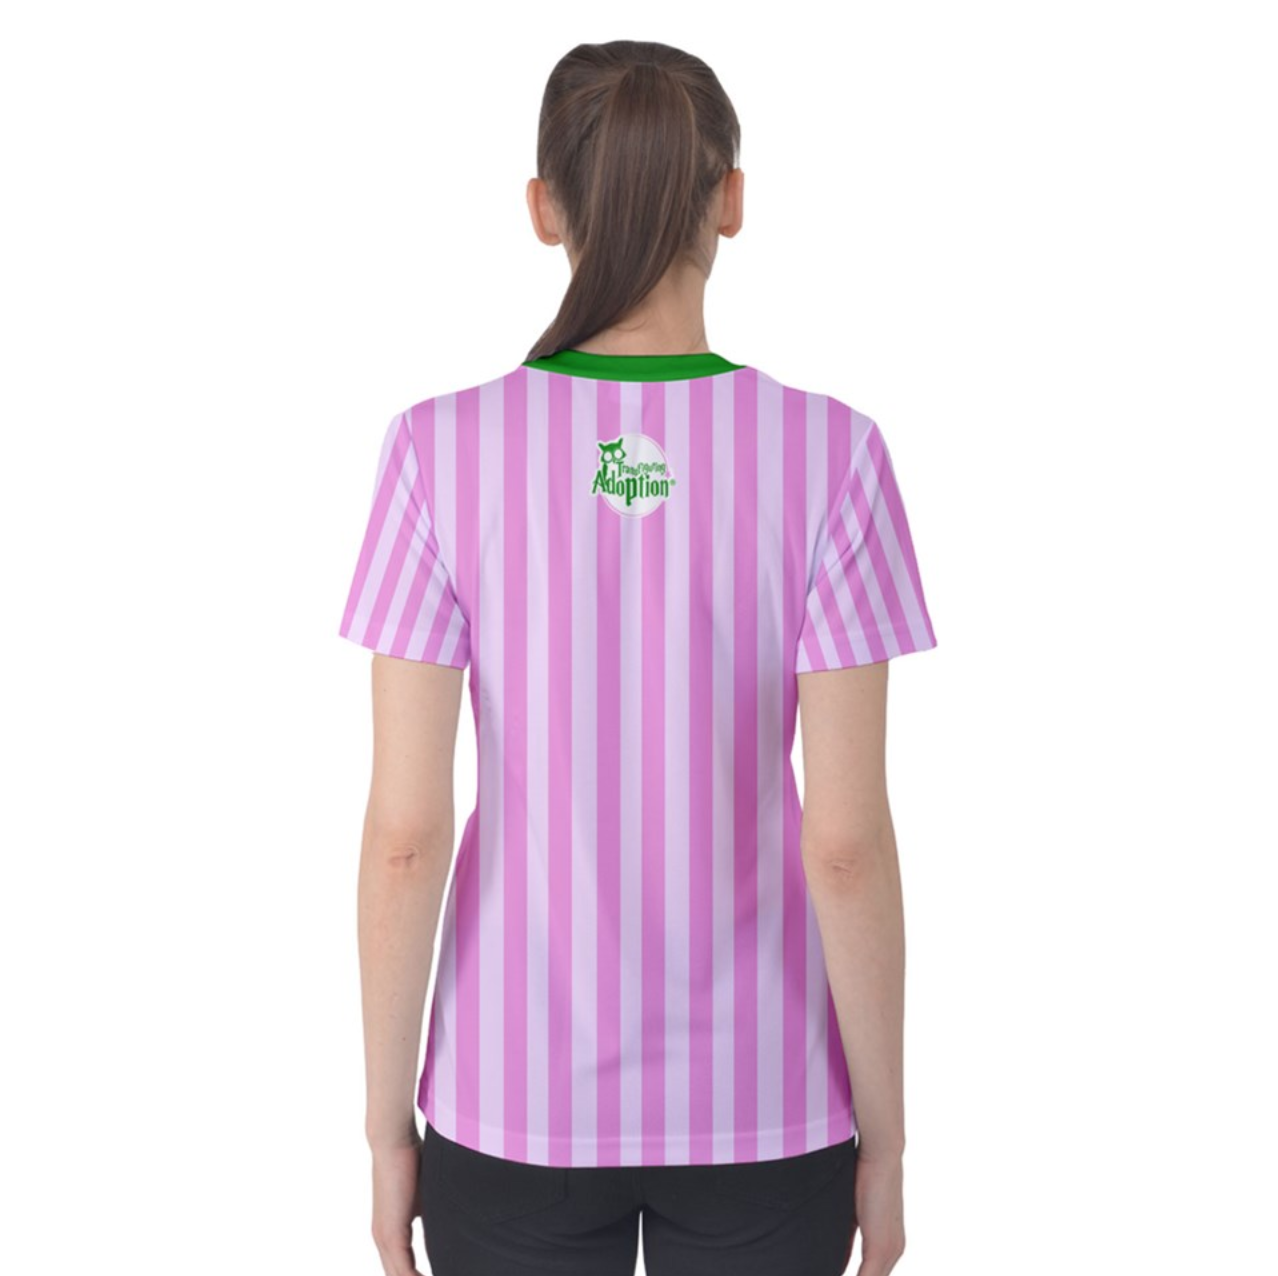 Candy Store Owl Women's Cotton Tee (Striped pattern)